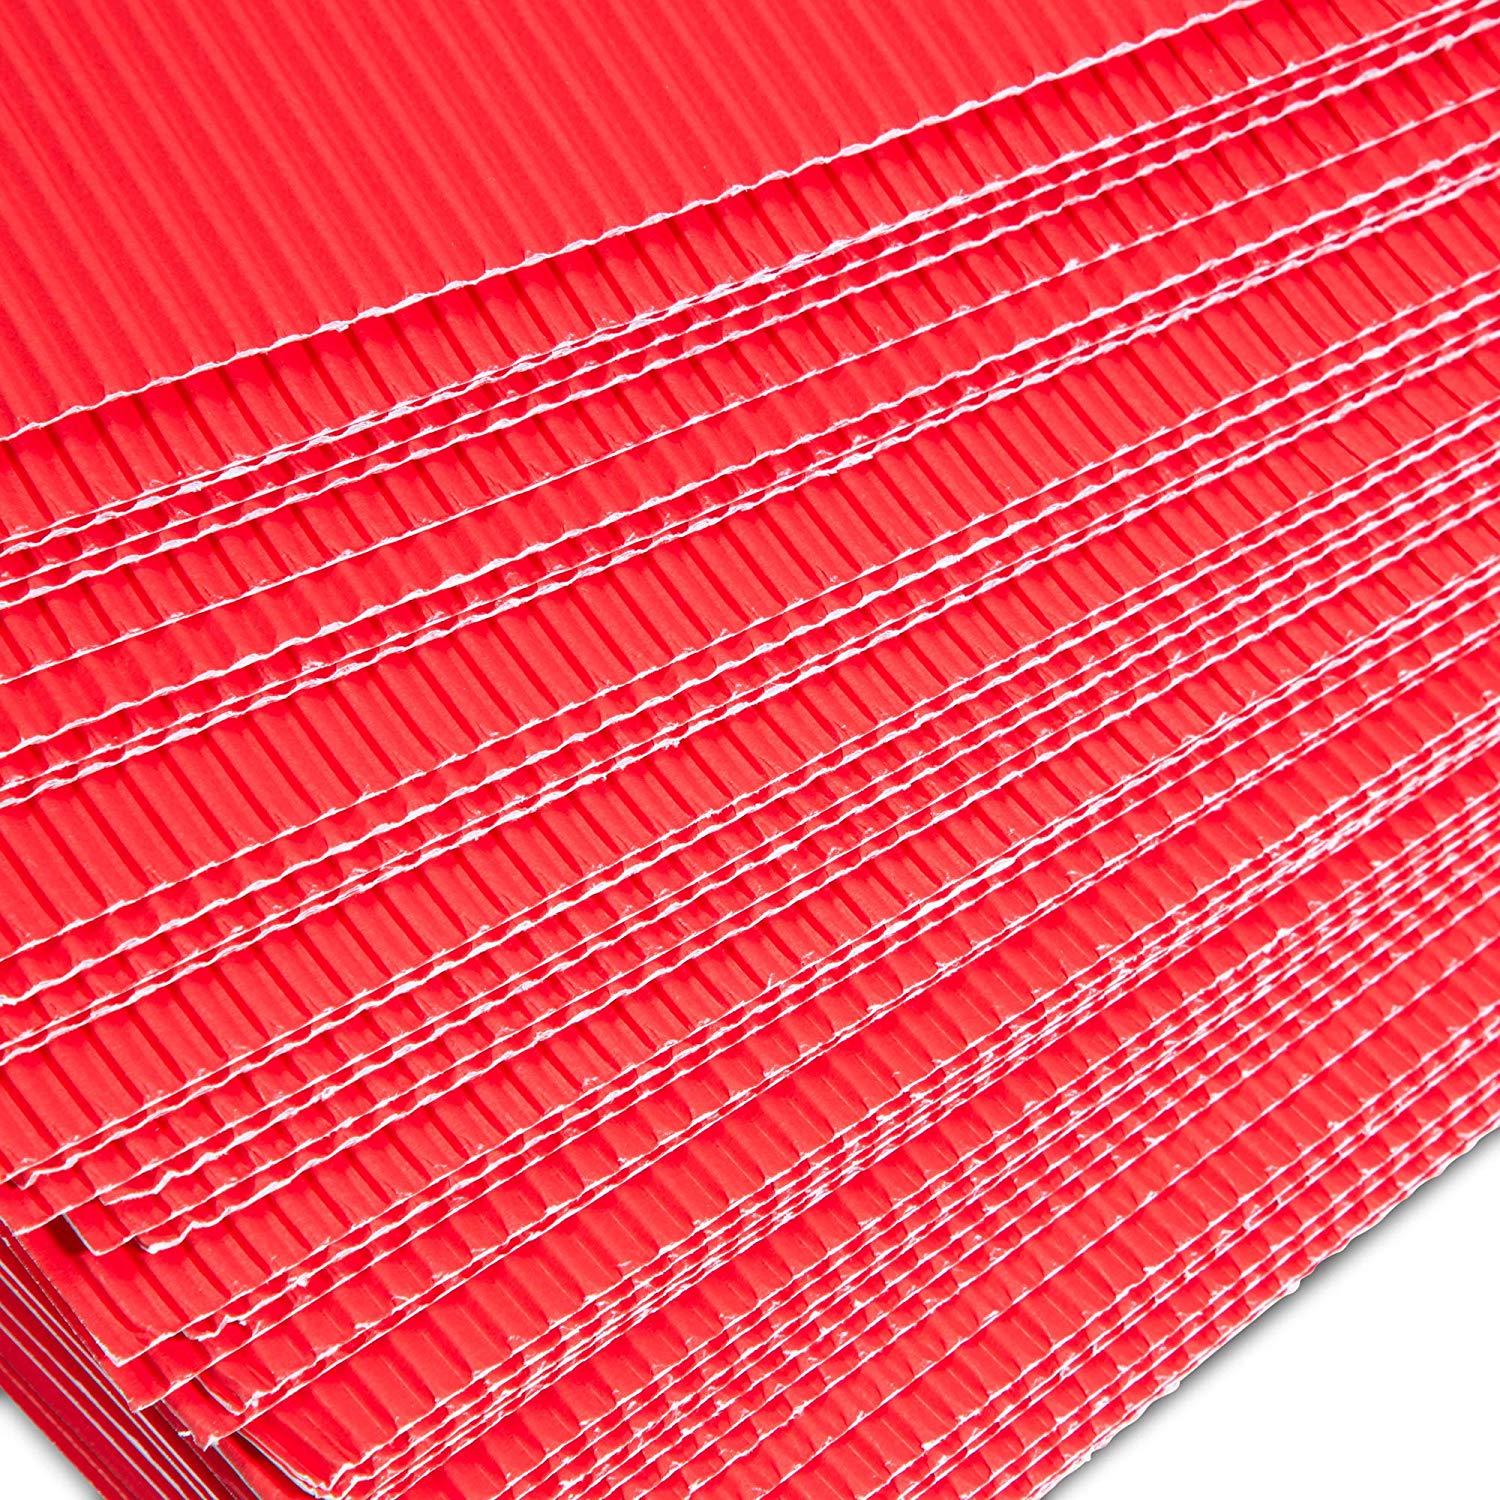 uxcell 5pcs Corrugated Cardboard Paper Sheets,Red,7.87-inch x  11.81-inch,for Craft and DIY Projects